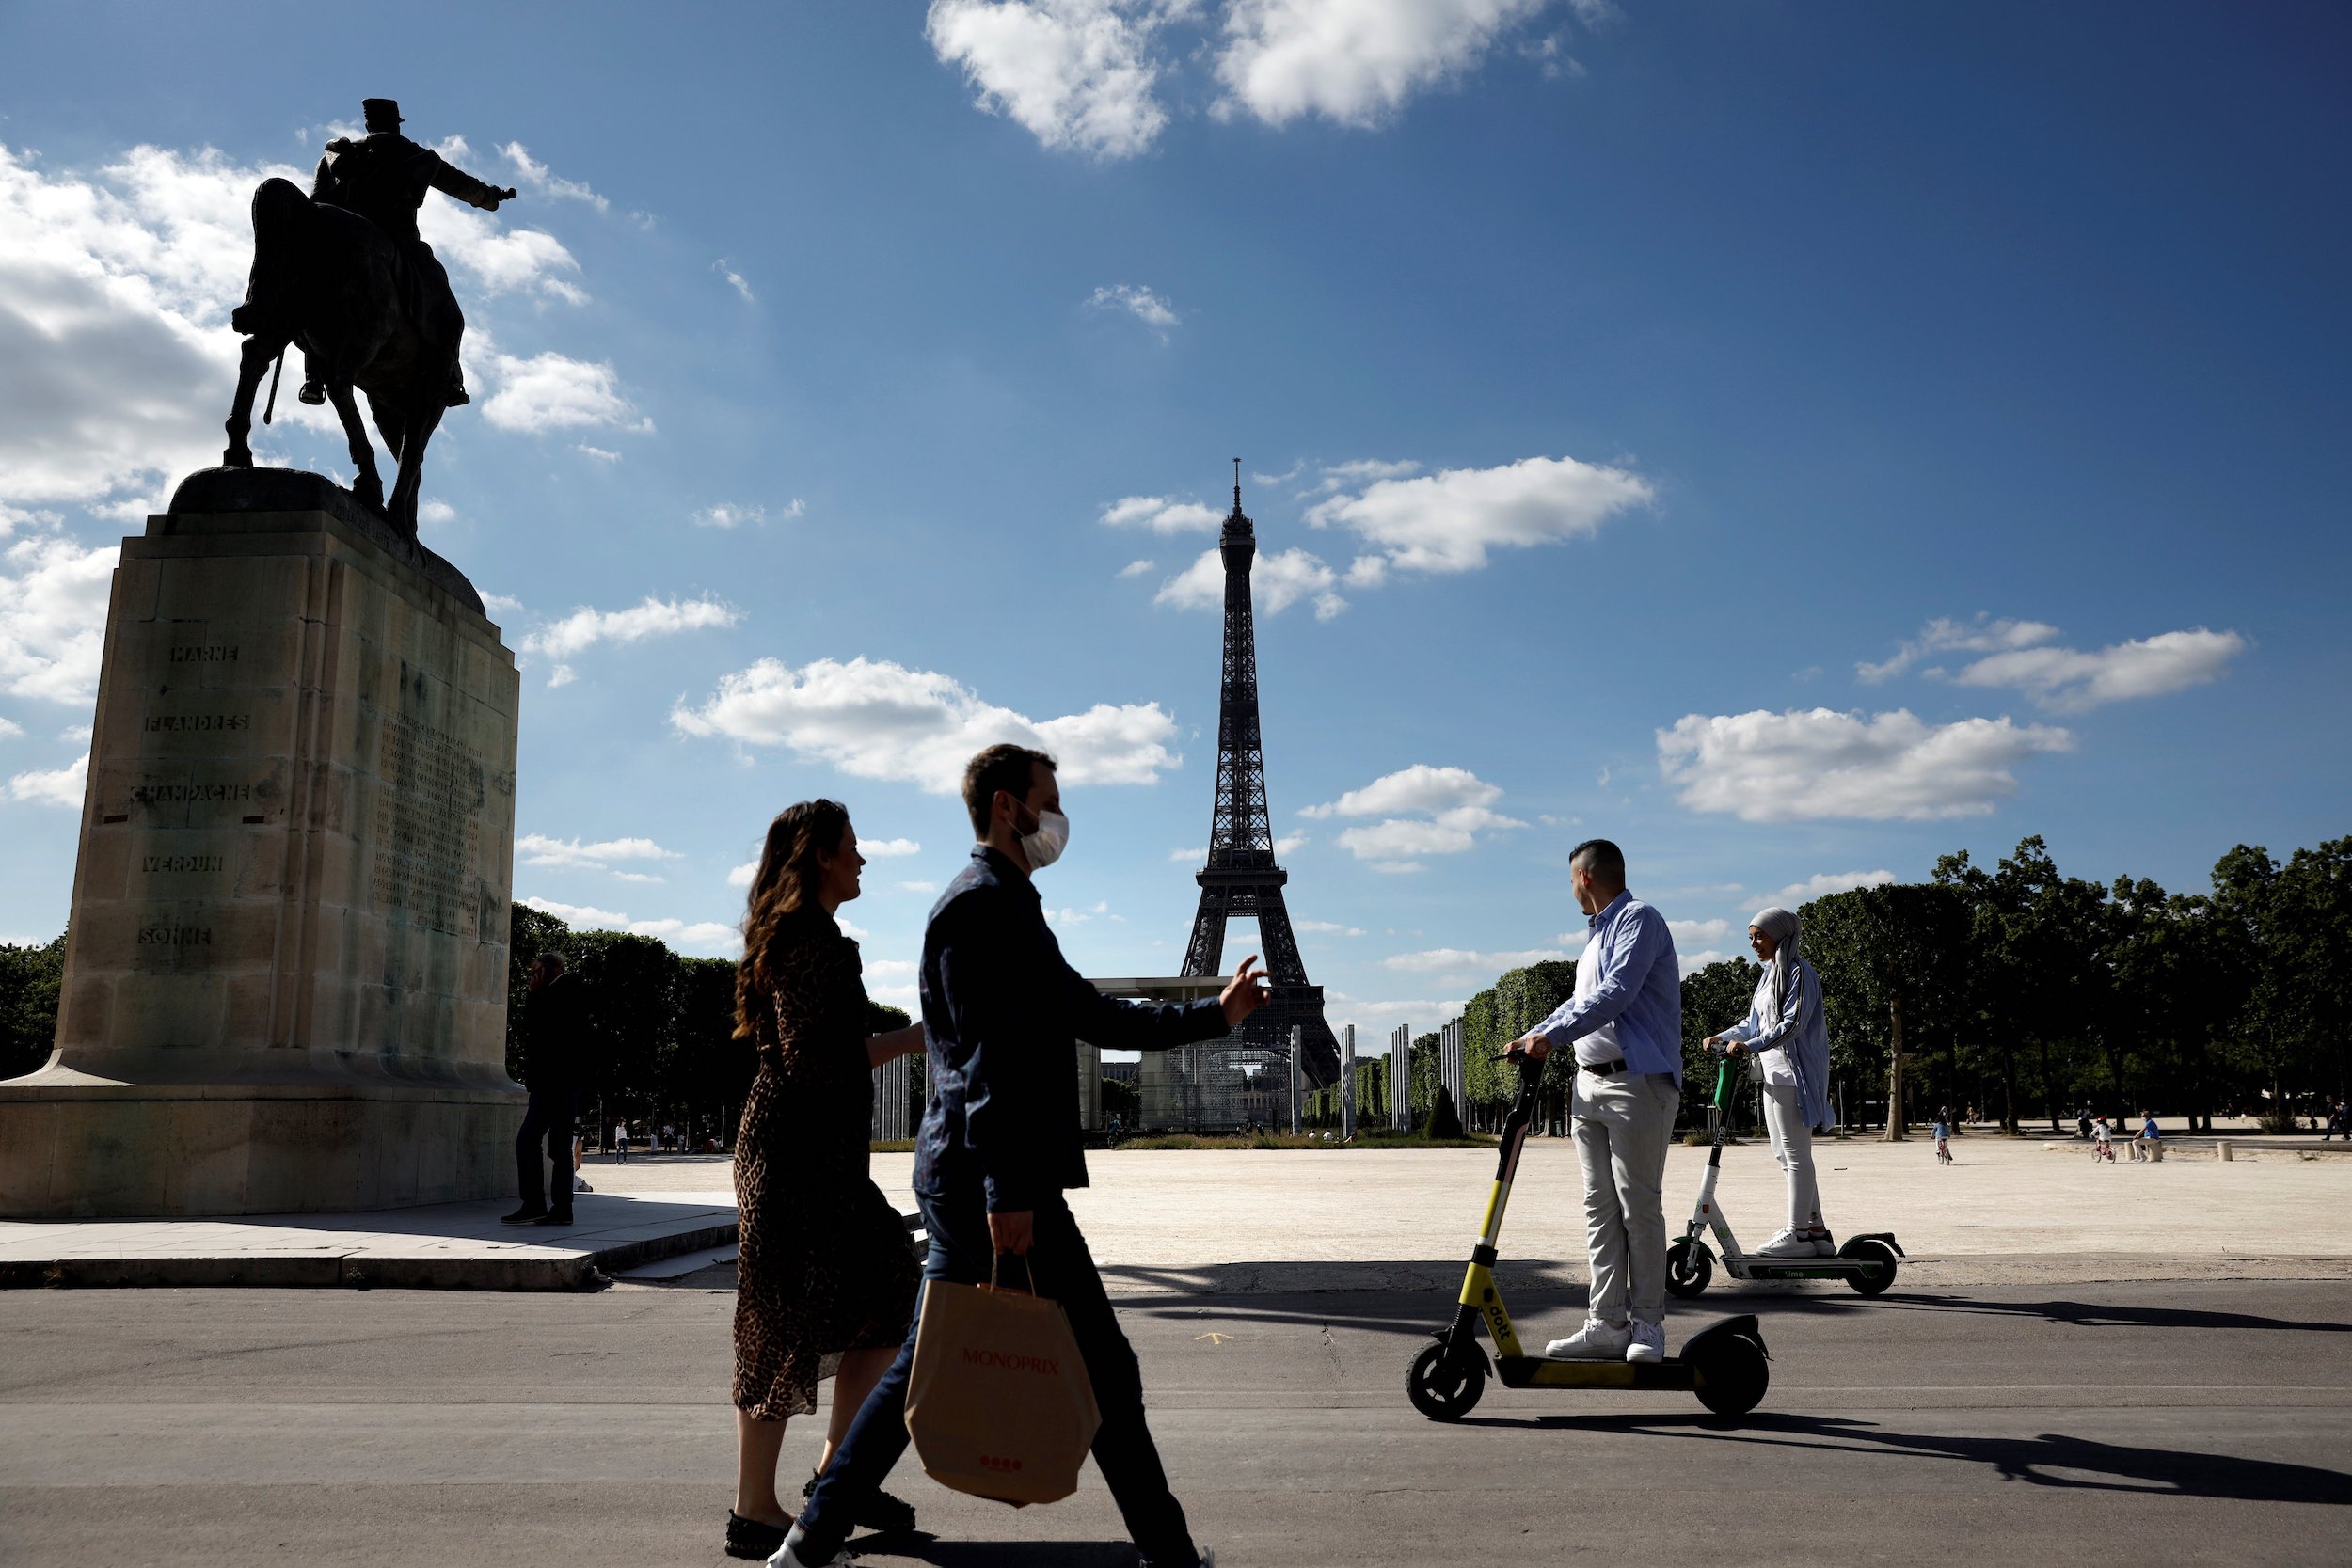 People wearing protective facemasks walk or ride their electric scooters past the statue of Marechal Joffre, Paris, May 19, 2020. This is as France relaxes its lockdown measures to stop the spread of COVID-19 (the novel coronavirus). 